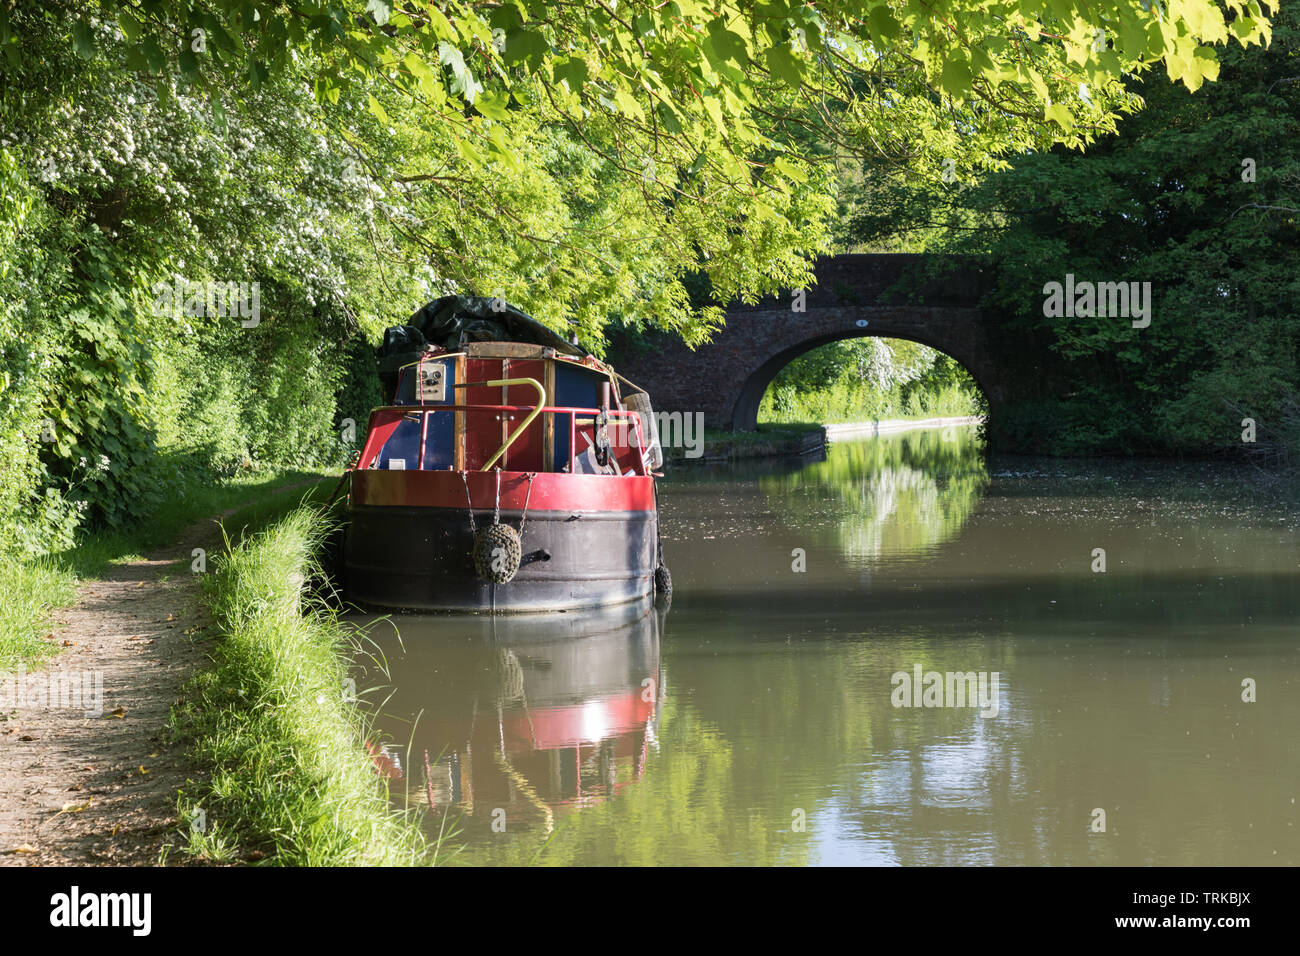 Watford, Northamptonshire, UK: Narrowboat moored against the bank of a canal under broad-leaved trees and the white flowers of a hawthorn tree. Stock Photo